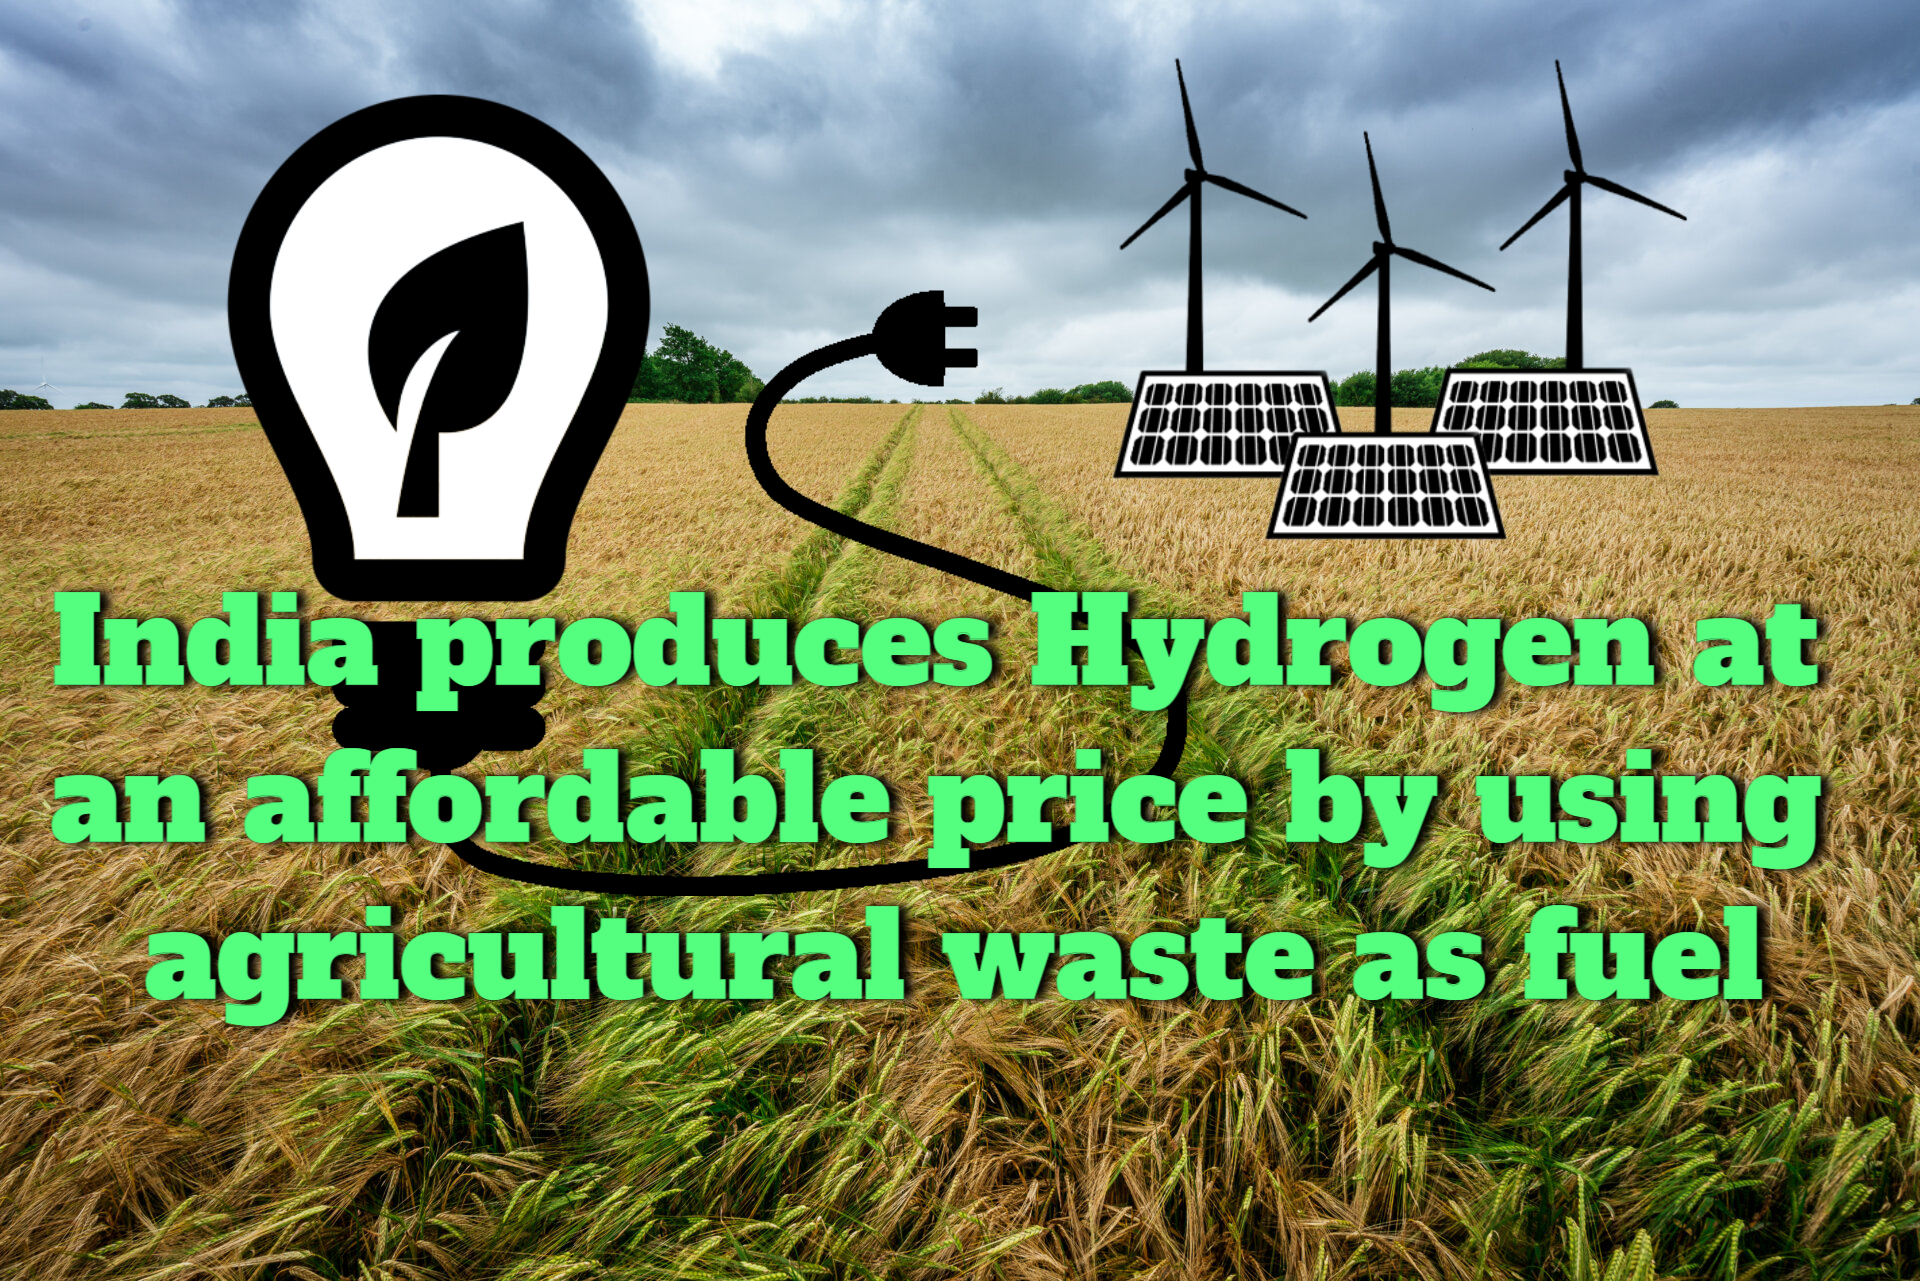 Using agricultural waste as fuel, India produces Hydrogen at an economical cost